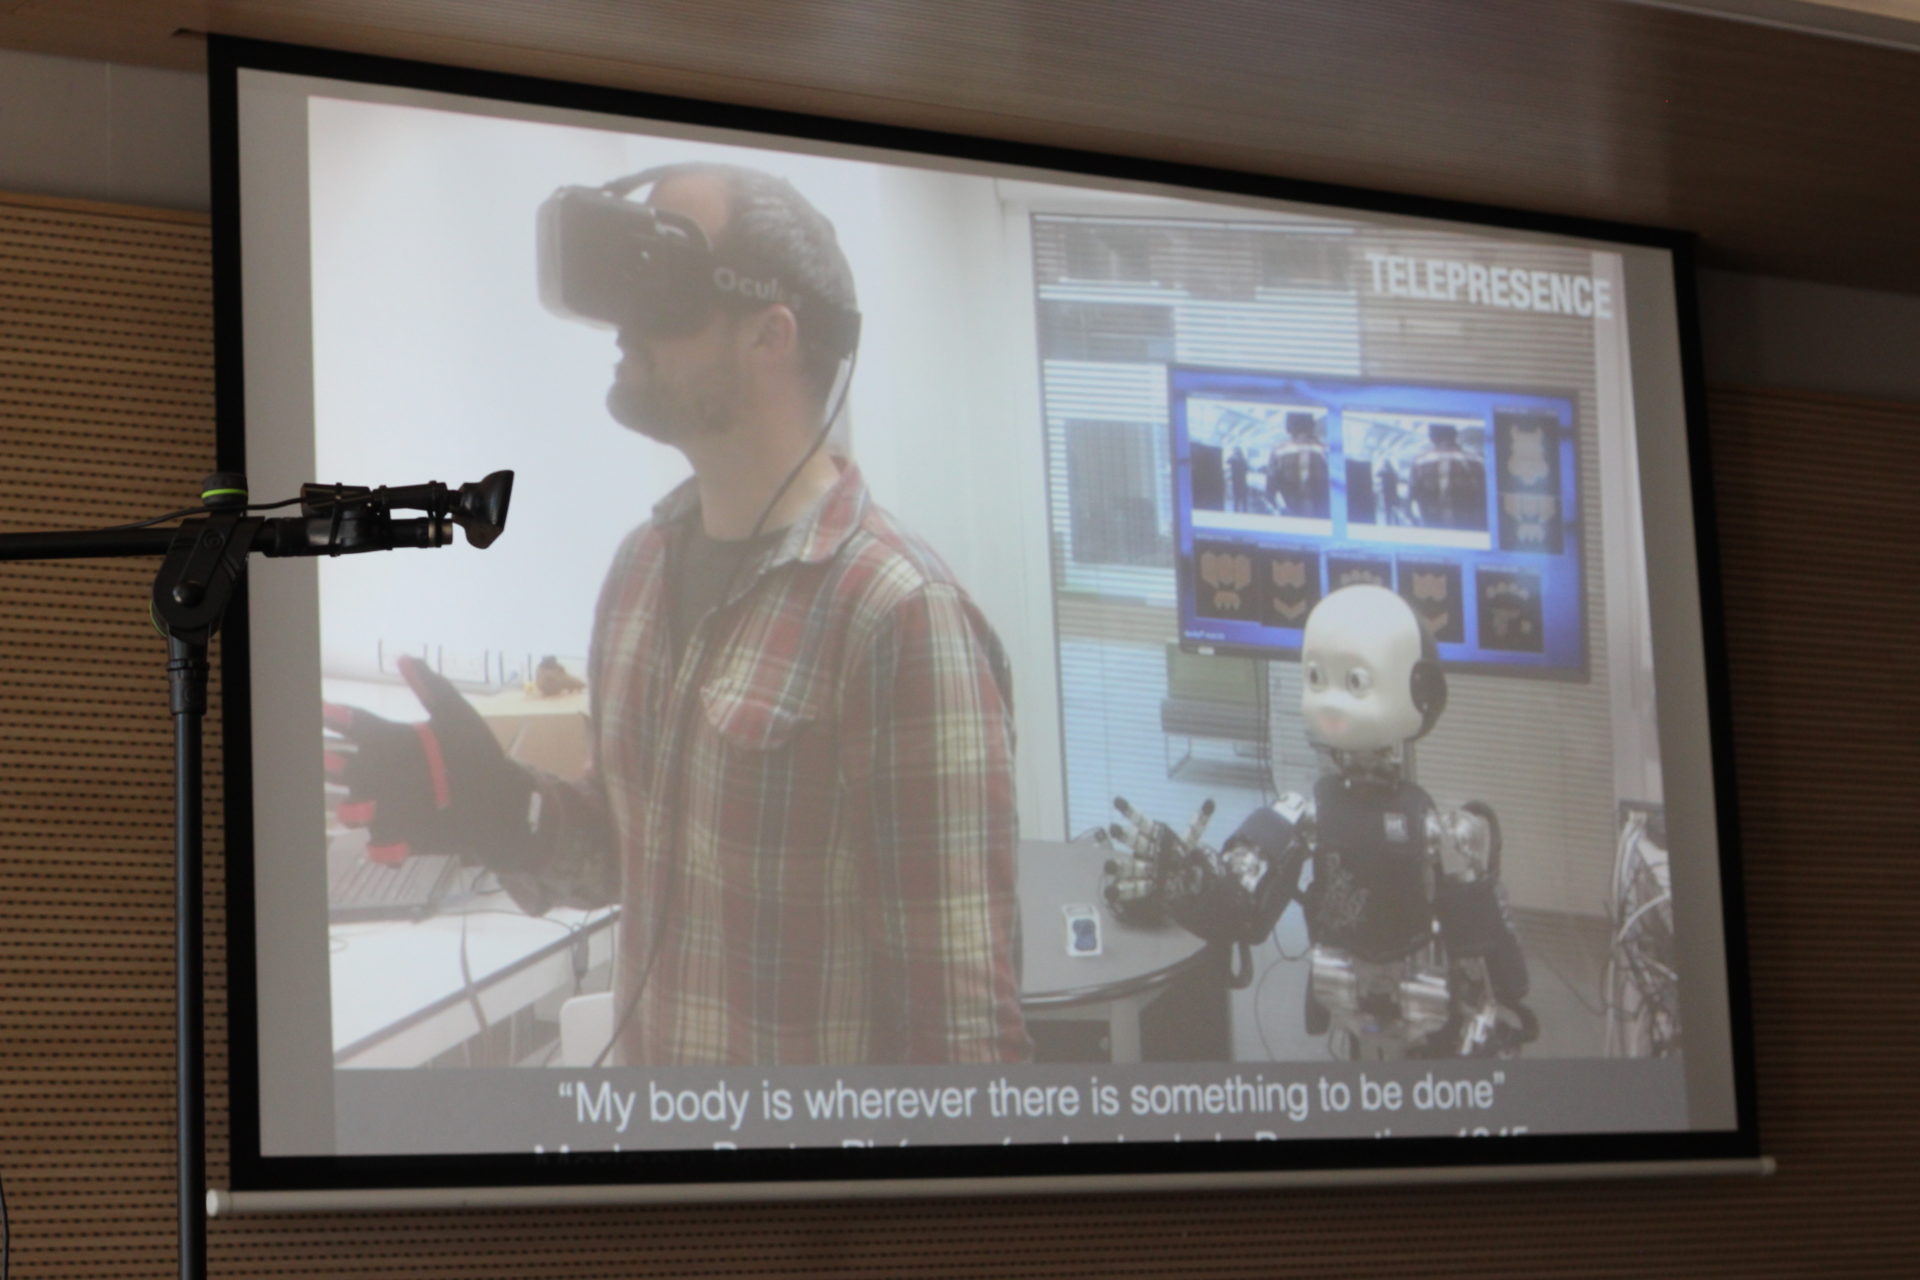 A PowerPoint slide on a big screen of a man using a VR headset to teleoperate a small, humanoid robot.